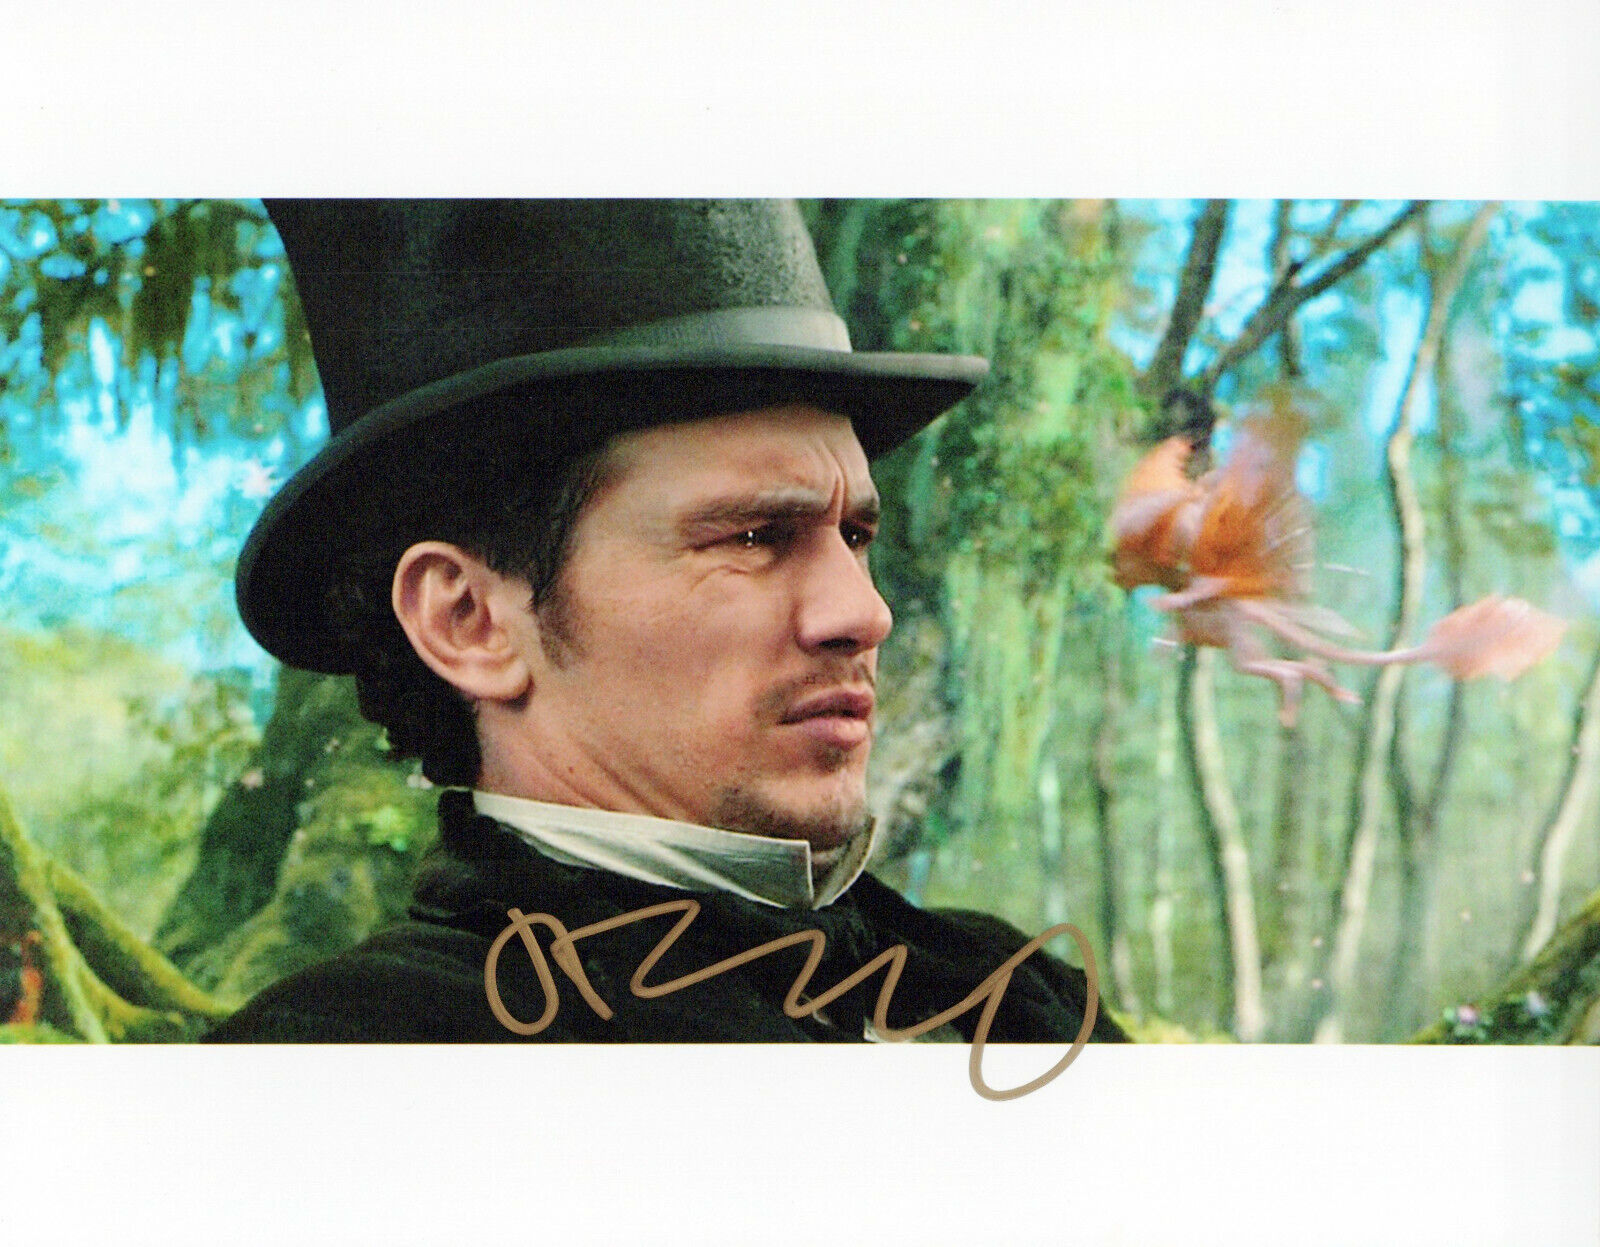 James Franco Oz The Great And Powerful autographed Photo Poster painting signed 8x10 #10